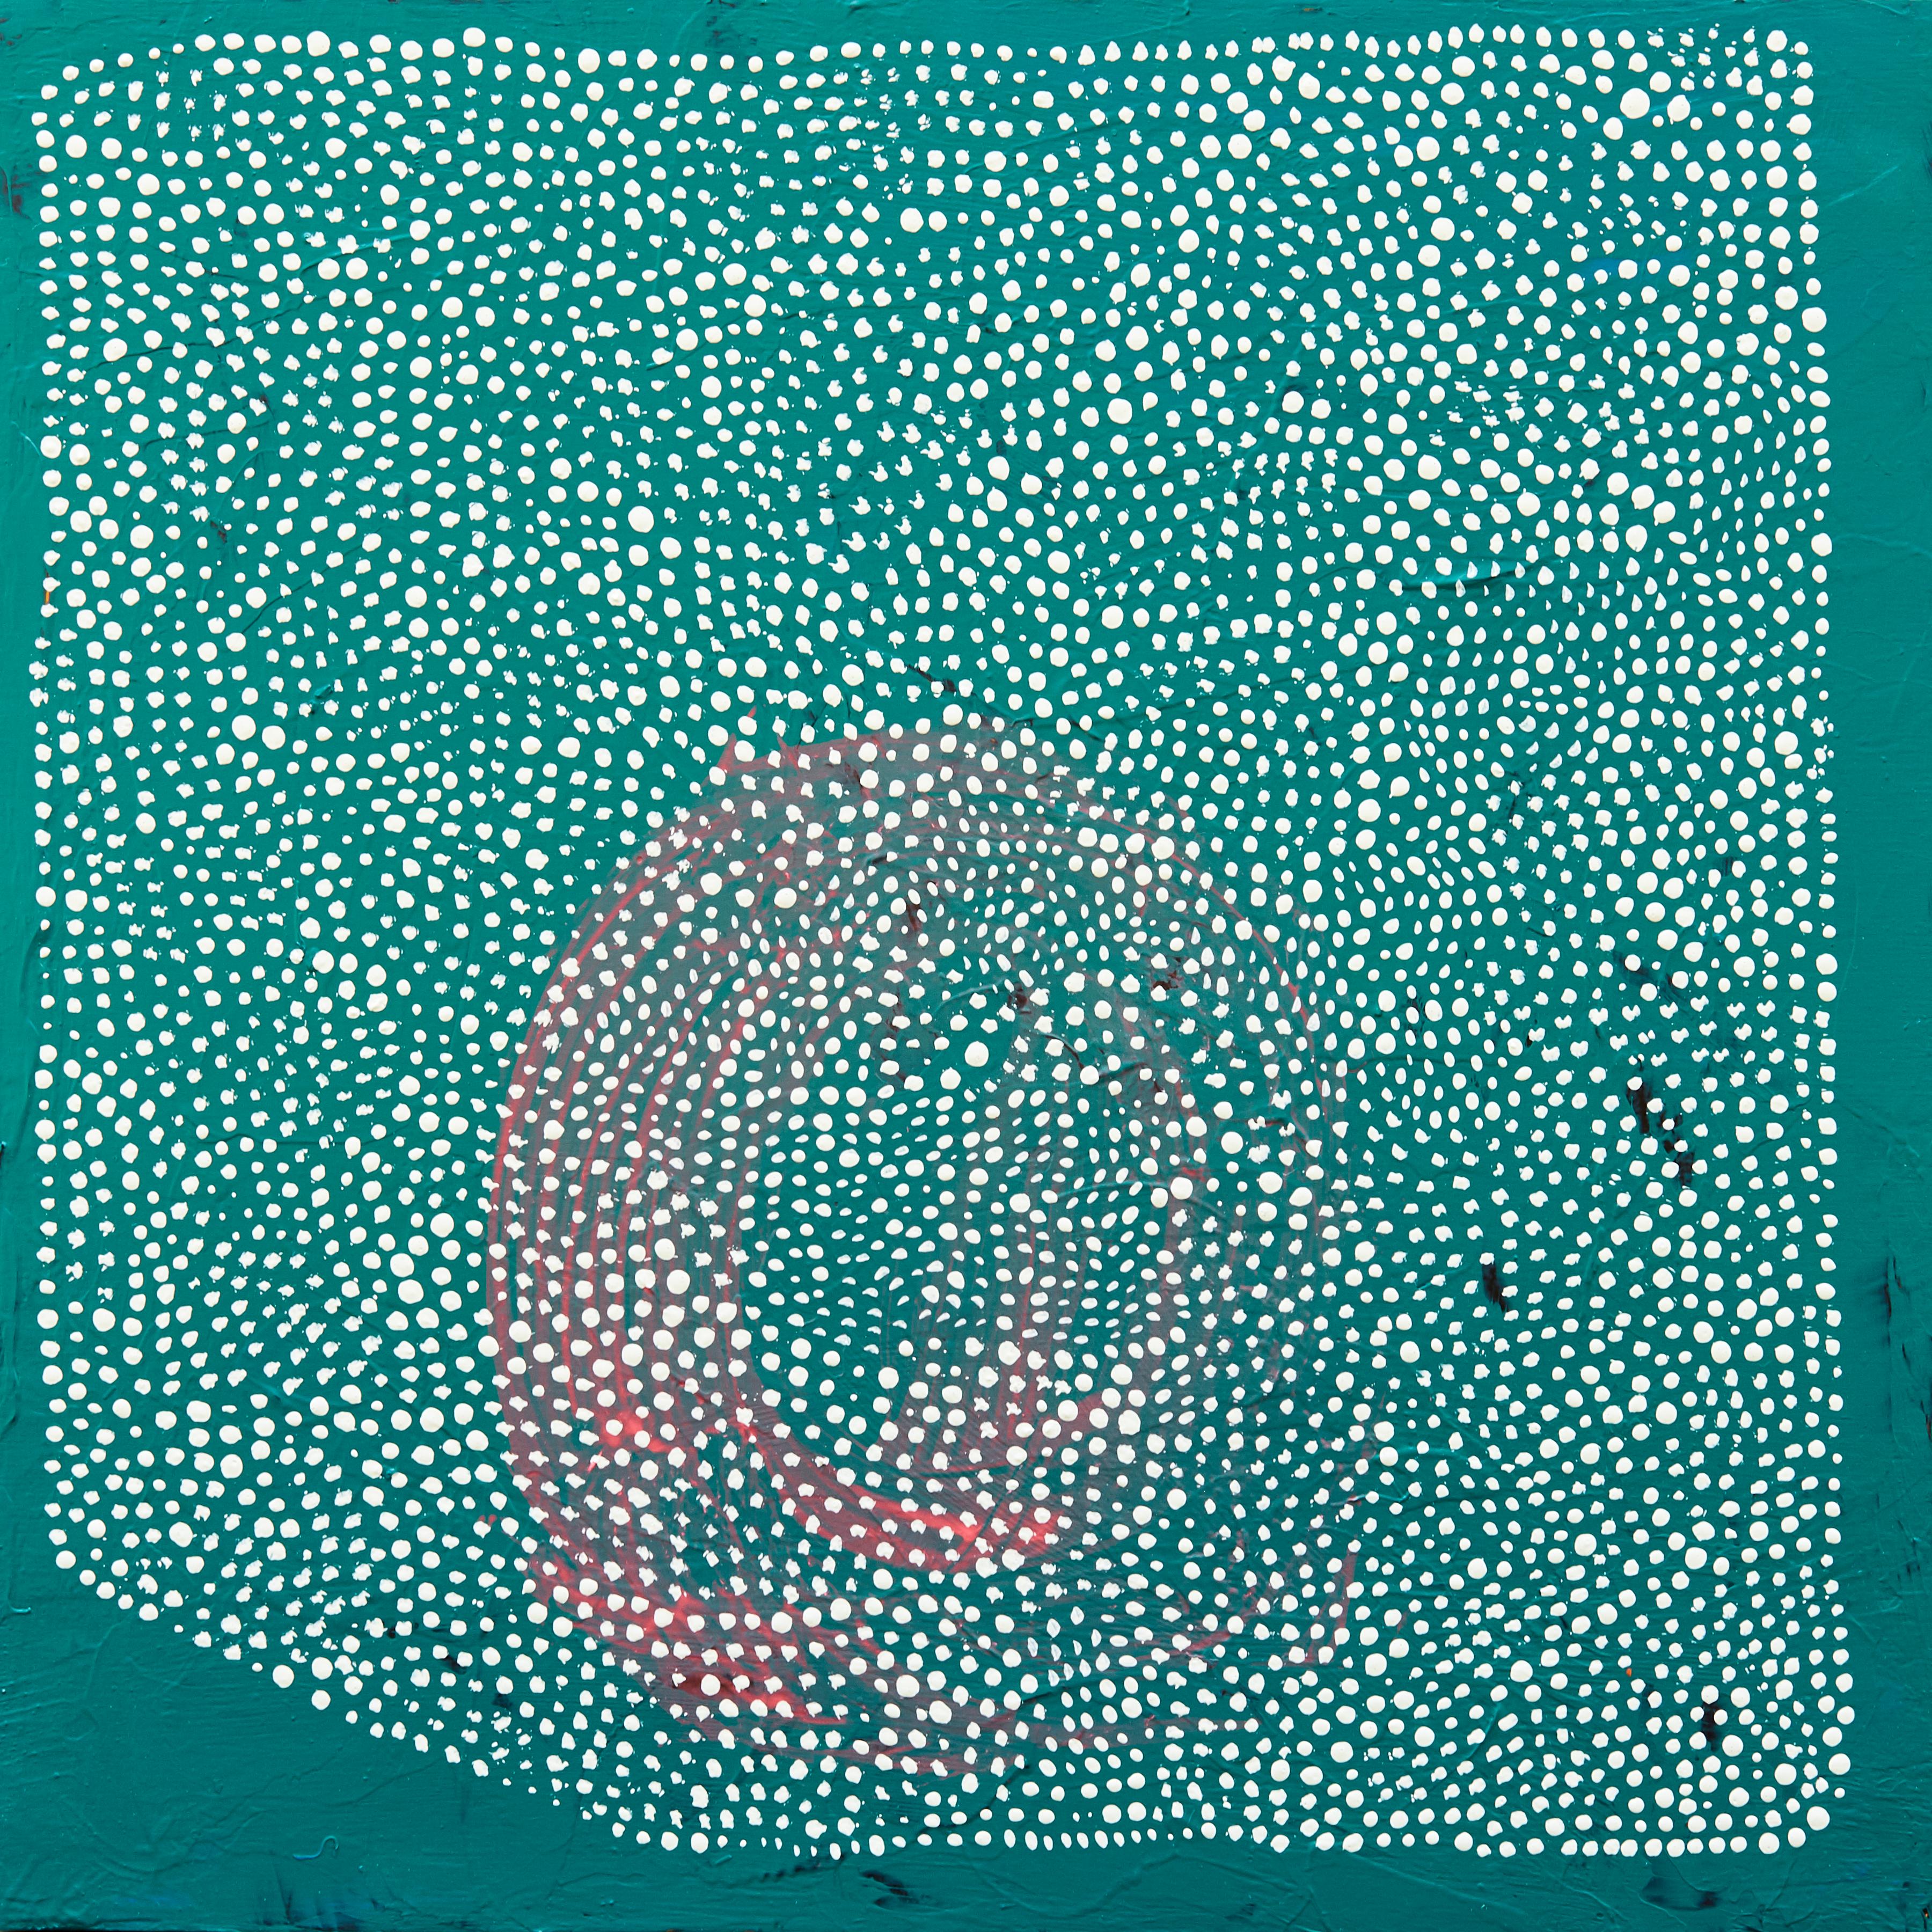 Maeve D'Arcy
Teeth Falling Out Dream, 2020
acrylic on panel
12 x 12 in.
(dar026)

This contemporary abstract painting on wood panel is composed dense white dots layered over turquoise and pink.  Available at Kathryn Markel Fine Arts.

"Borders,